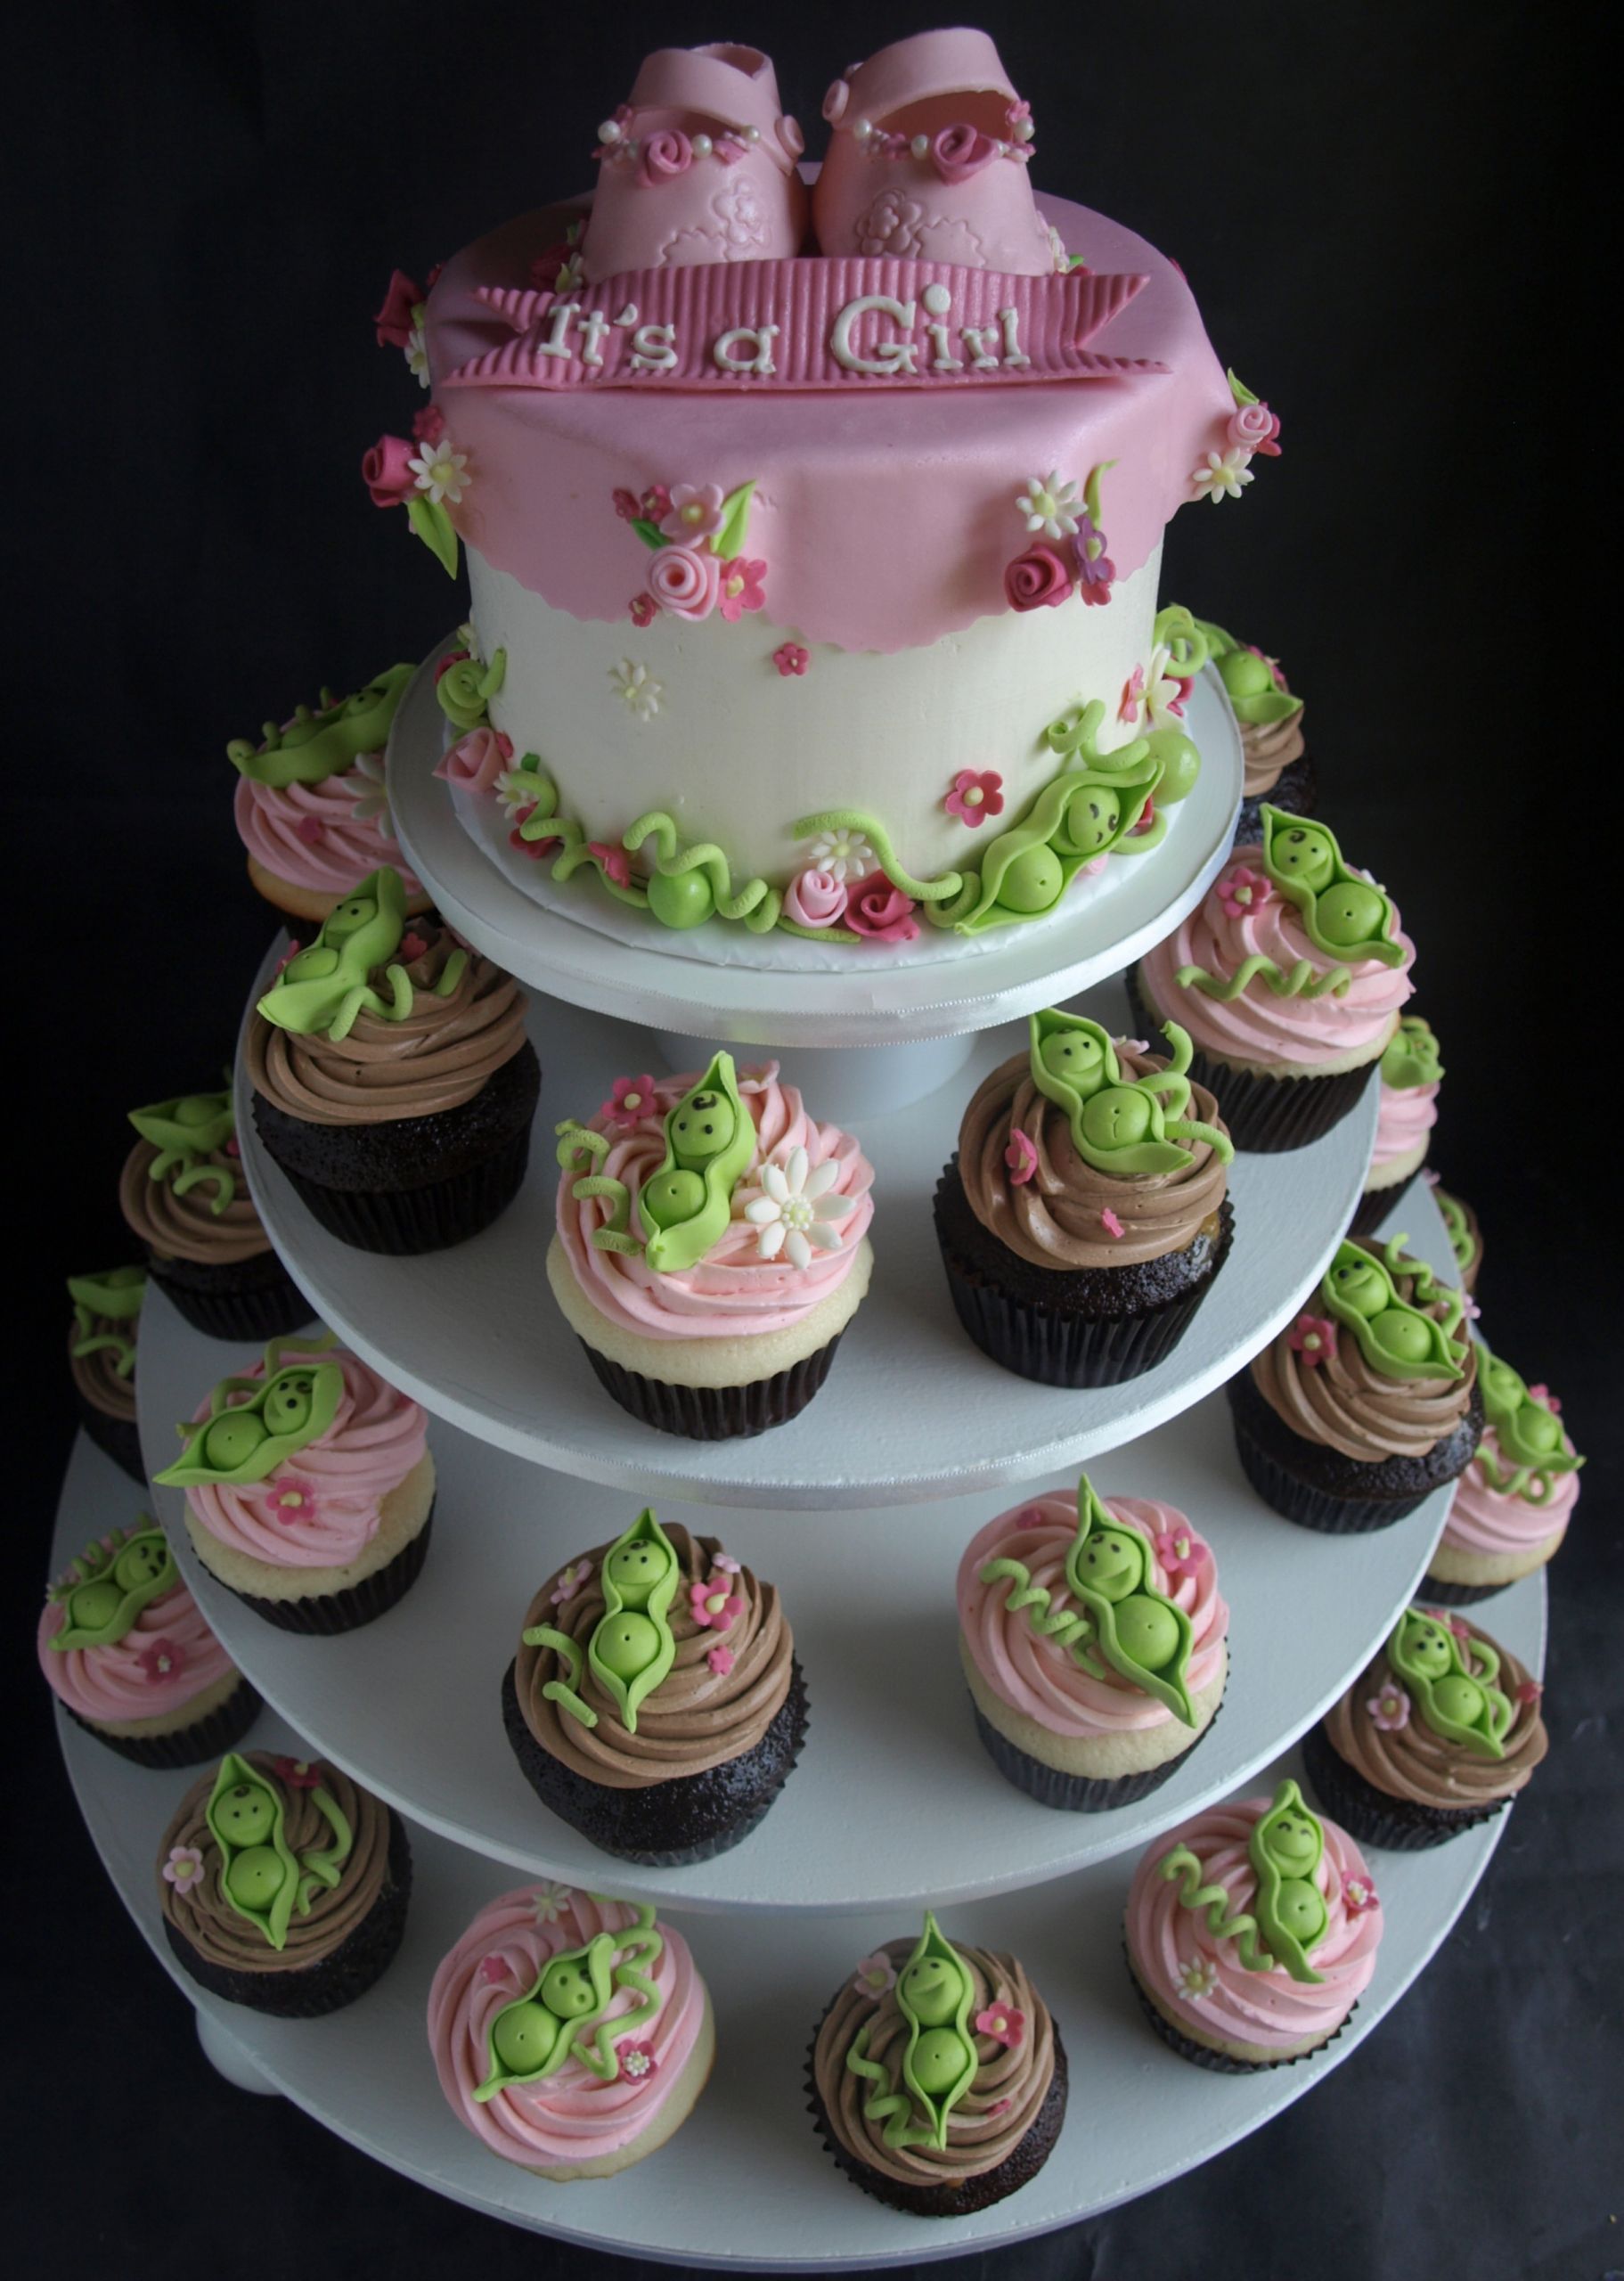 Baby Shower Cakes And Cupcakes
 Cupcakes by Laurie Clarke Cakes